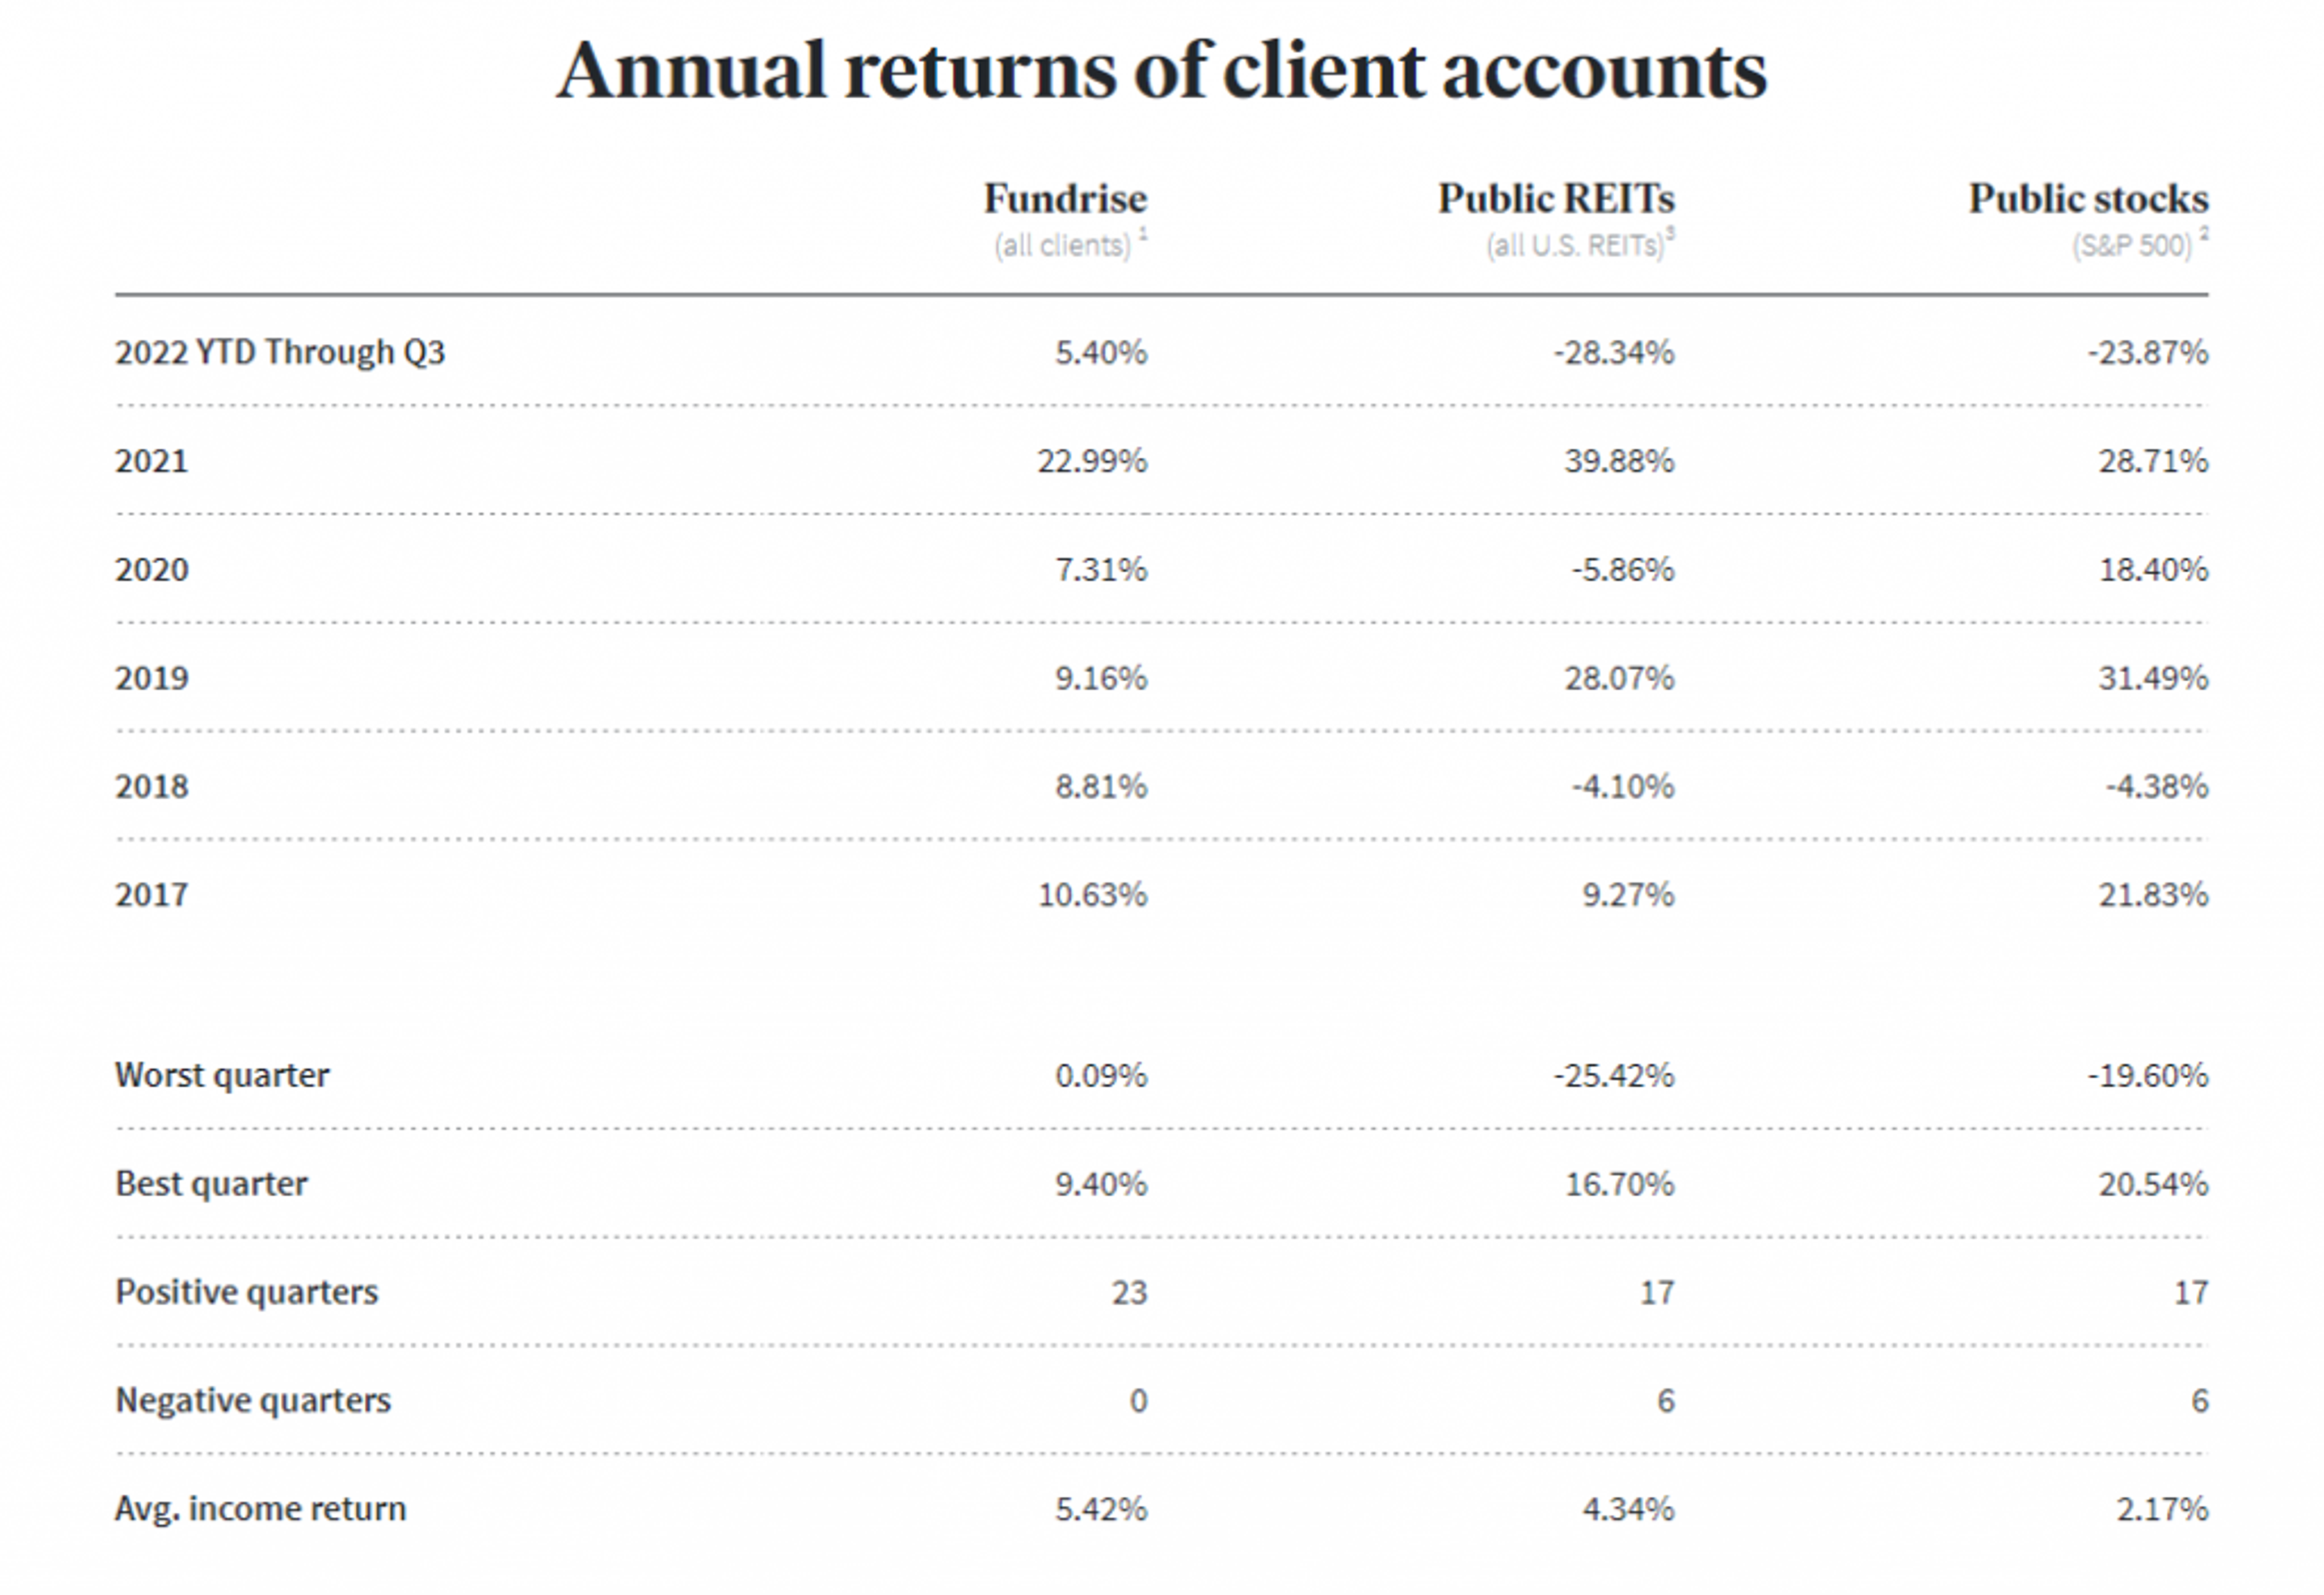 Fundrise-returns-across-all-client-accounts